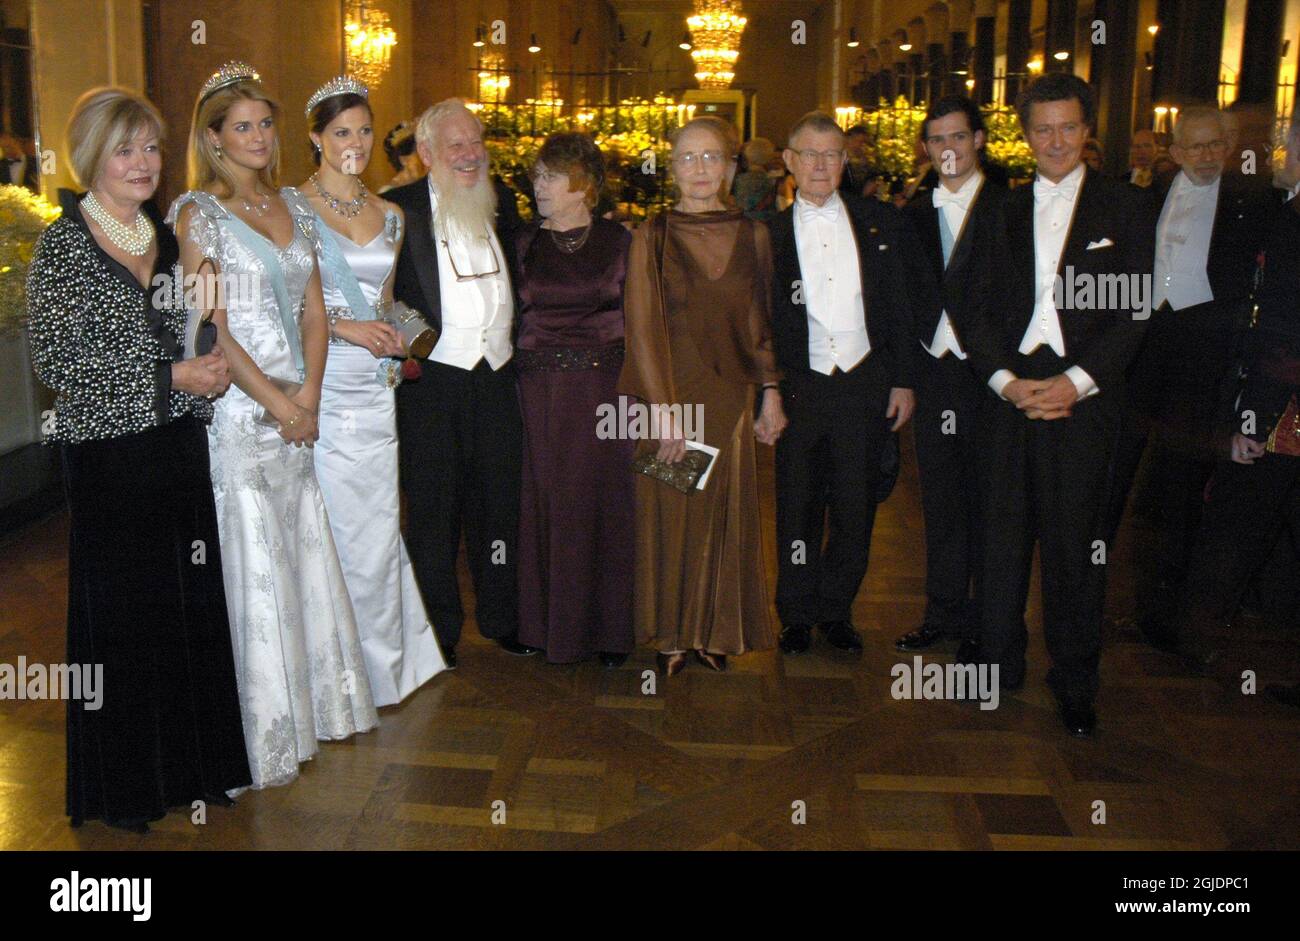 ARCHIVE Queen Silvia's brother Walther Ludwig Sommerlath is dead. He died at Karolinska University Hospital in Huddinge on October 23 after a period of illness. ORIGINAL CAPTION: Ingrid Sommerlath, Princess Madeleine, Crown Princess Victoria, Economy Prize winner Robert J Aumann and wife, Economy Prize winner Thomas C Schelling and wife Alice Coleman Schelling, Prince Carl Philip, Walther L Sommerlath and Medicine Laureate J. Robin Warren pictured in the Gallery of the Prince after the dinner at the Nobel banquet in the City Hall in Stockholm November 10, 2005. Photo Johan Nilsson / TT Code 5 Stock Photo